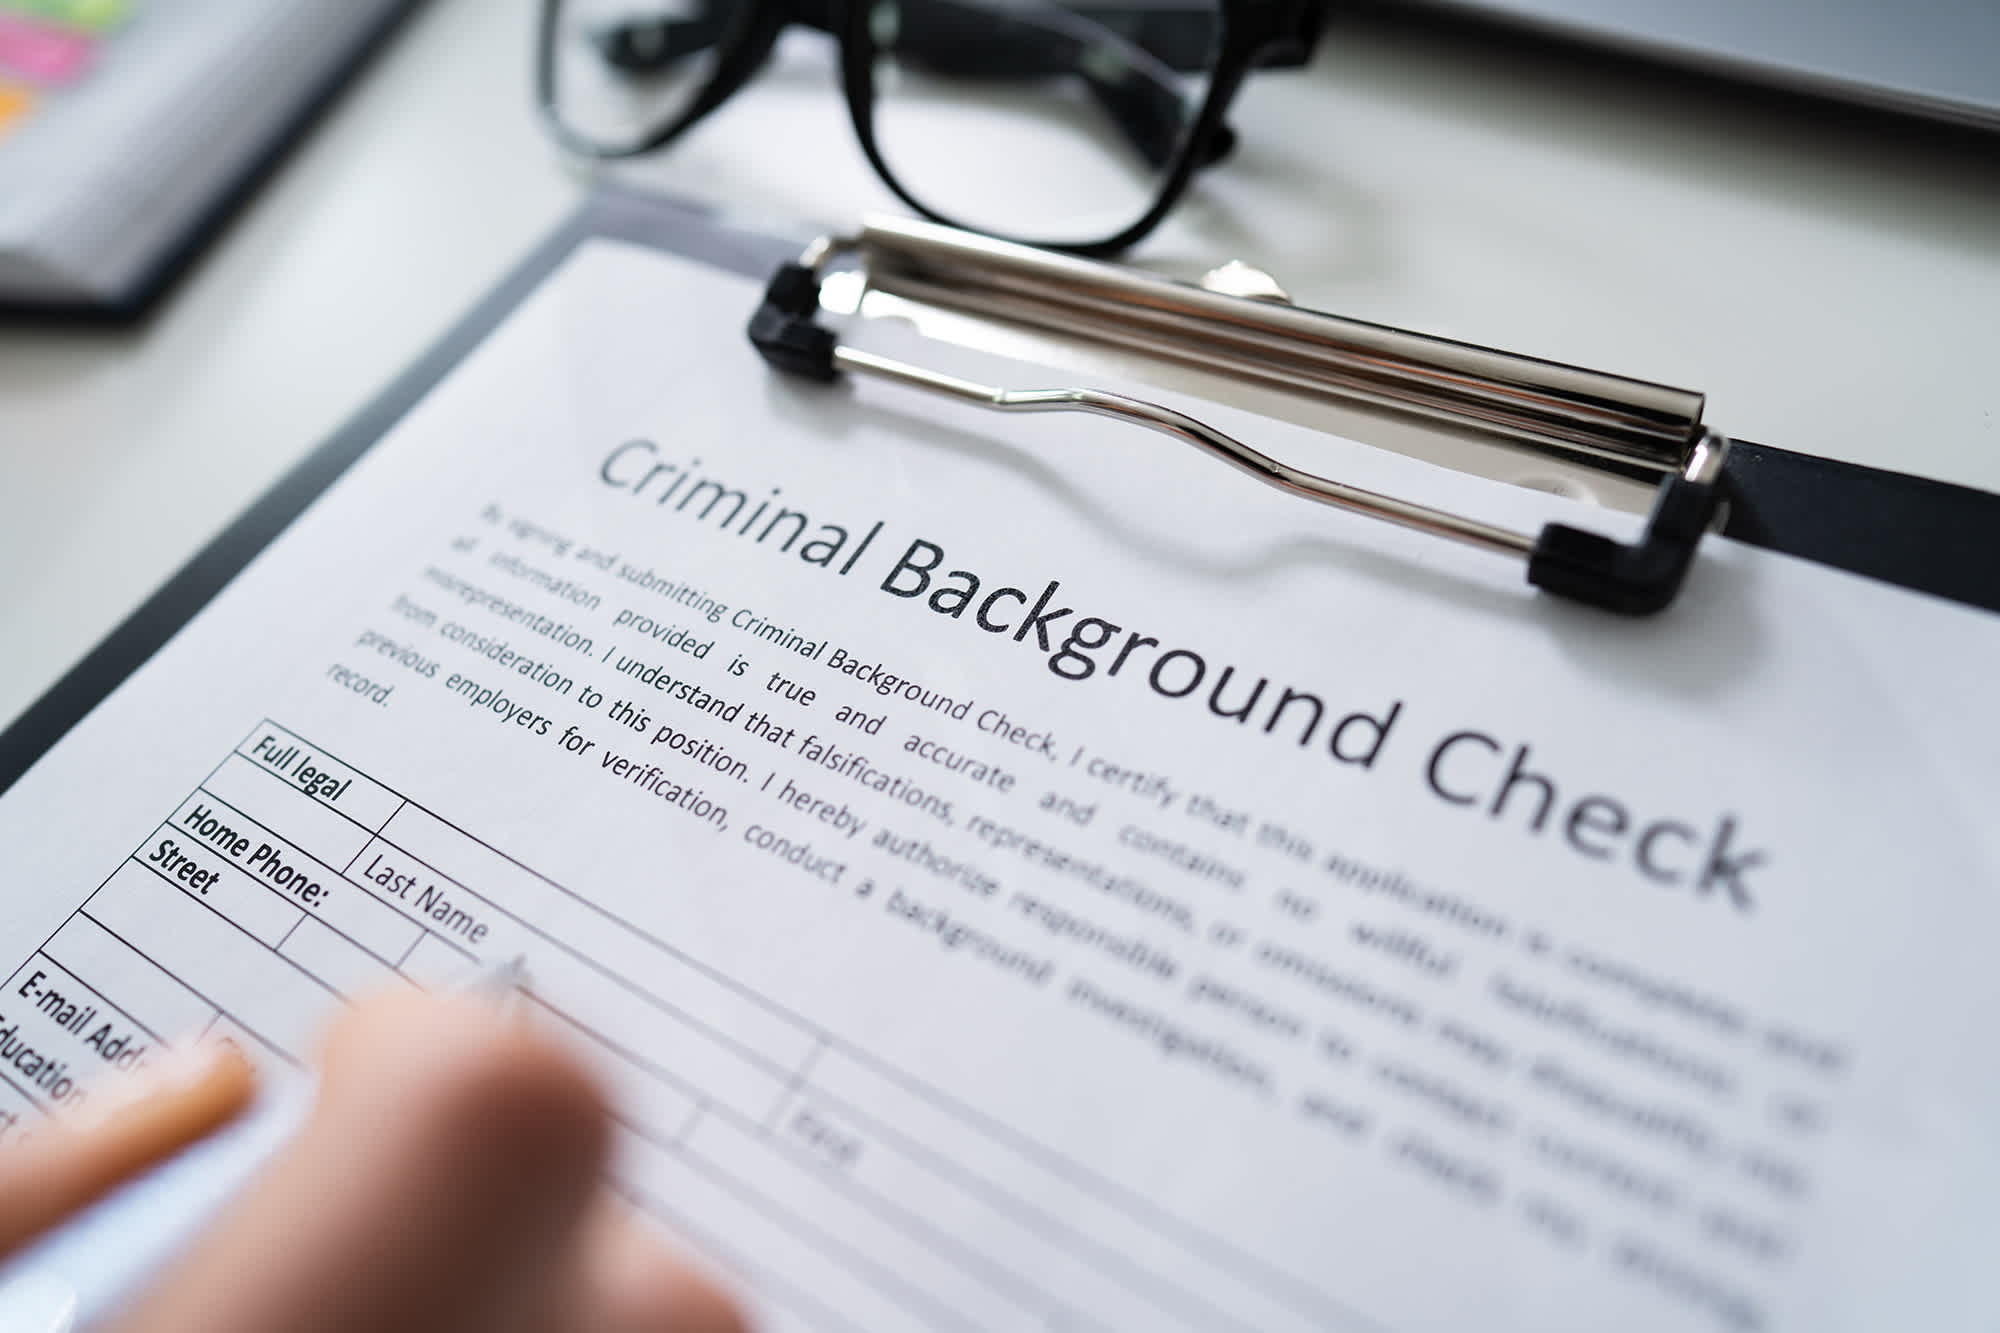 An image of a criminal background check